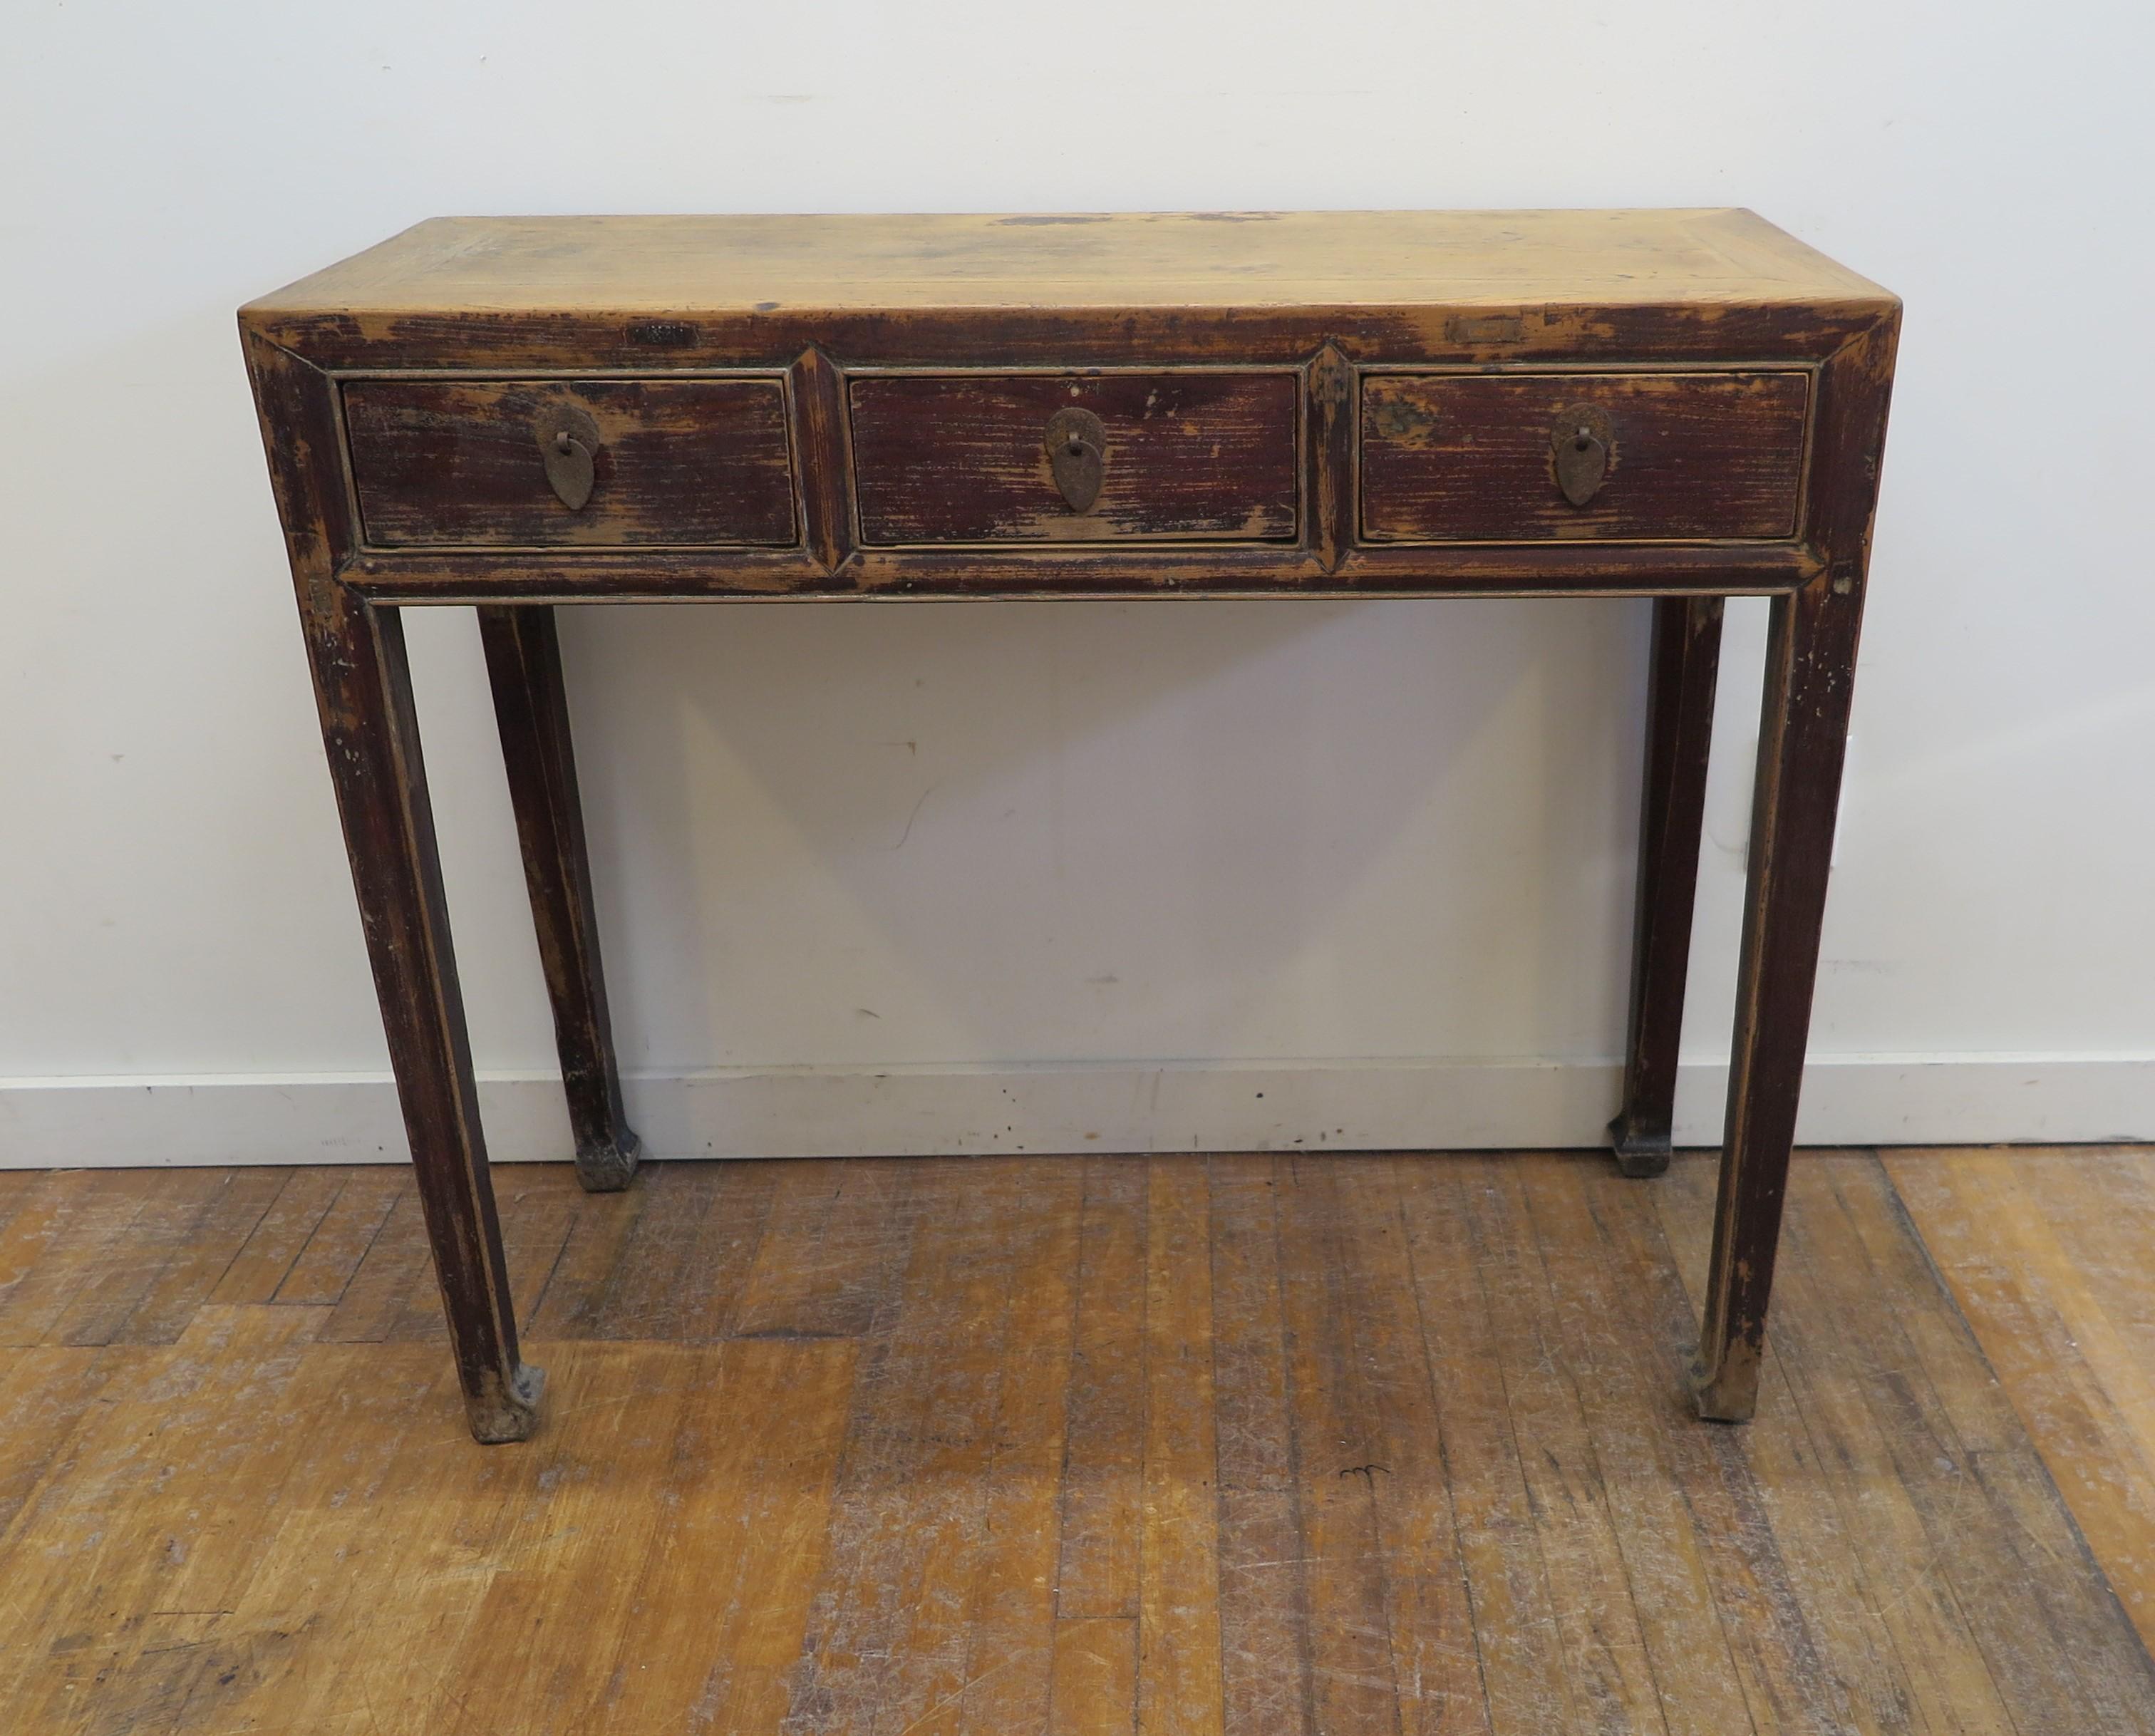 19th century rustic console table. Antique rustic three drawer console table. Chinese Elm wood with three drawers set on tapered legs terminating to hoofed feet. Wonderful time endured patina in very good condition. Strong and solid for everyday